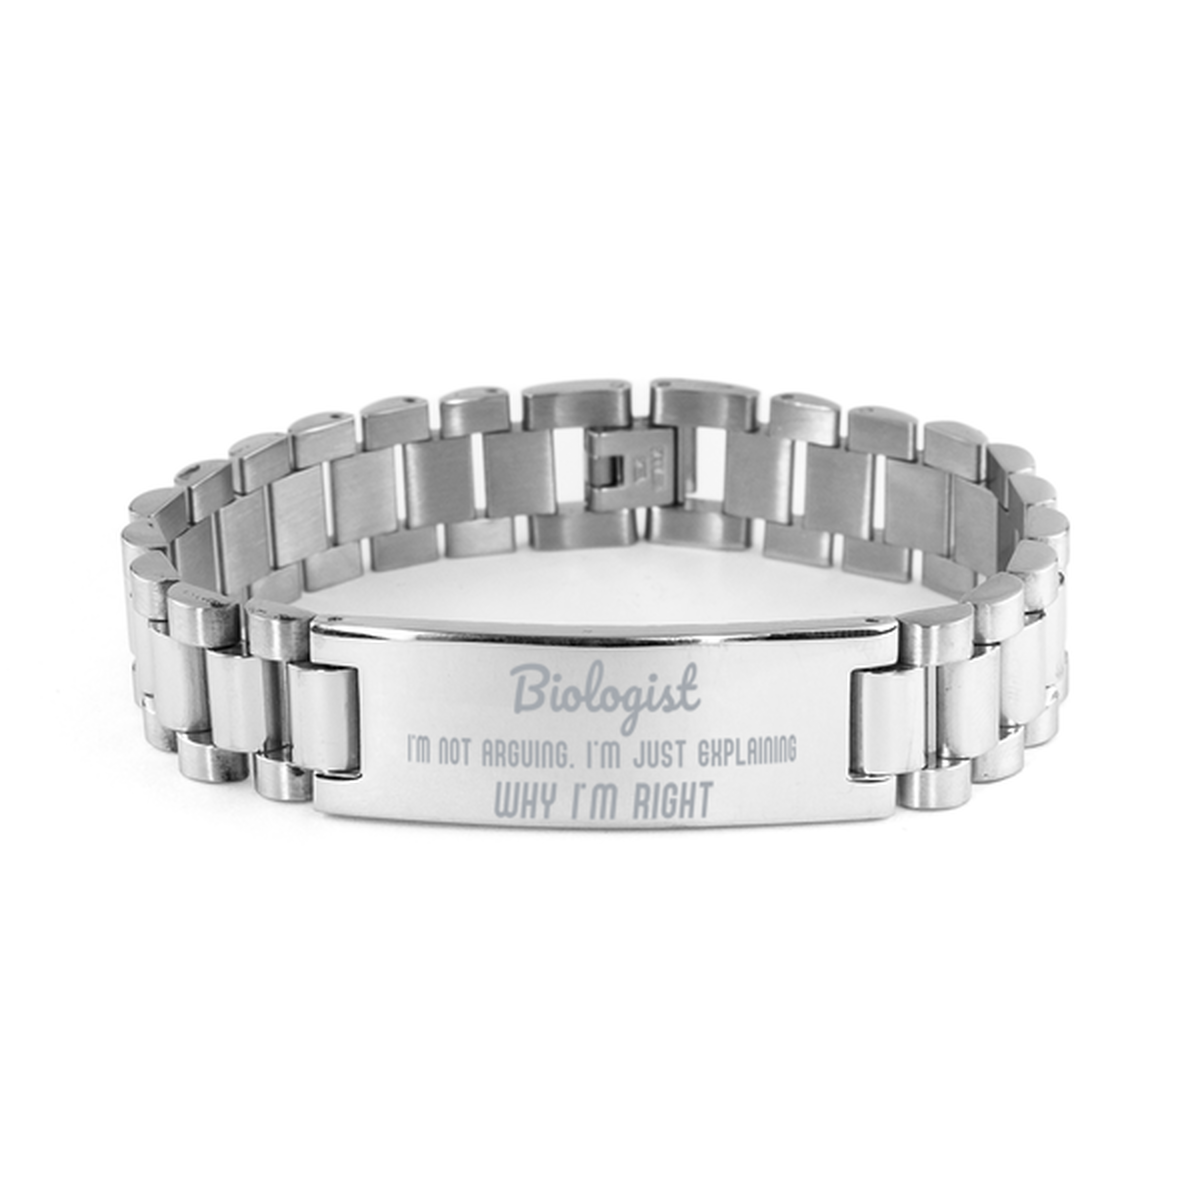 Biologist I'm not Arguing. I'm Just Explaining Why I'm RIGHT Ladder Stainless Steel Bracelet, Graduation Birthday Christmas Biologist Gifts For Biologist Funny Saying Quote Present for Men Women Coworker